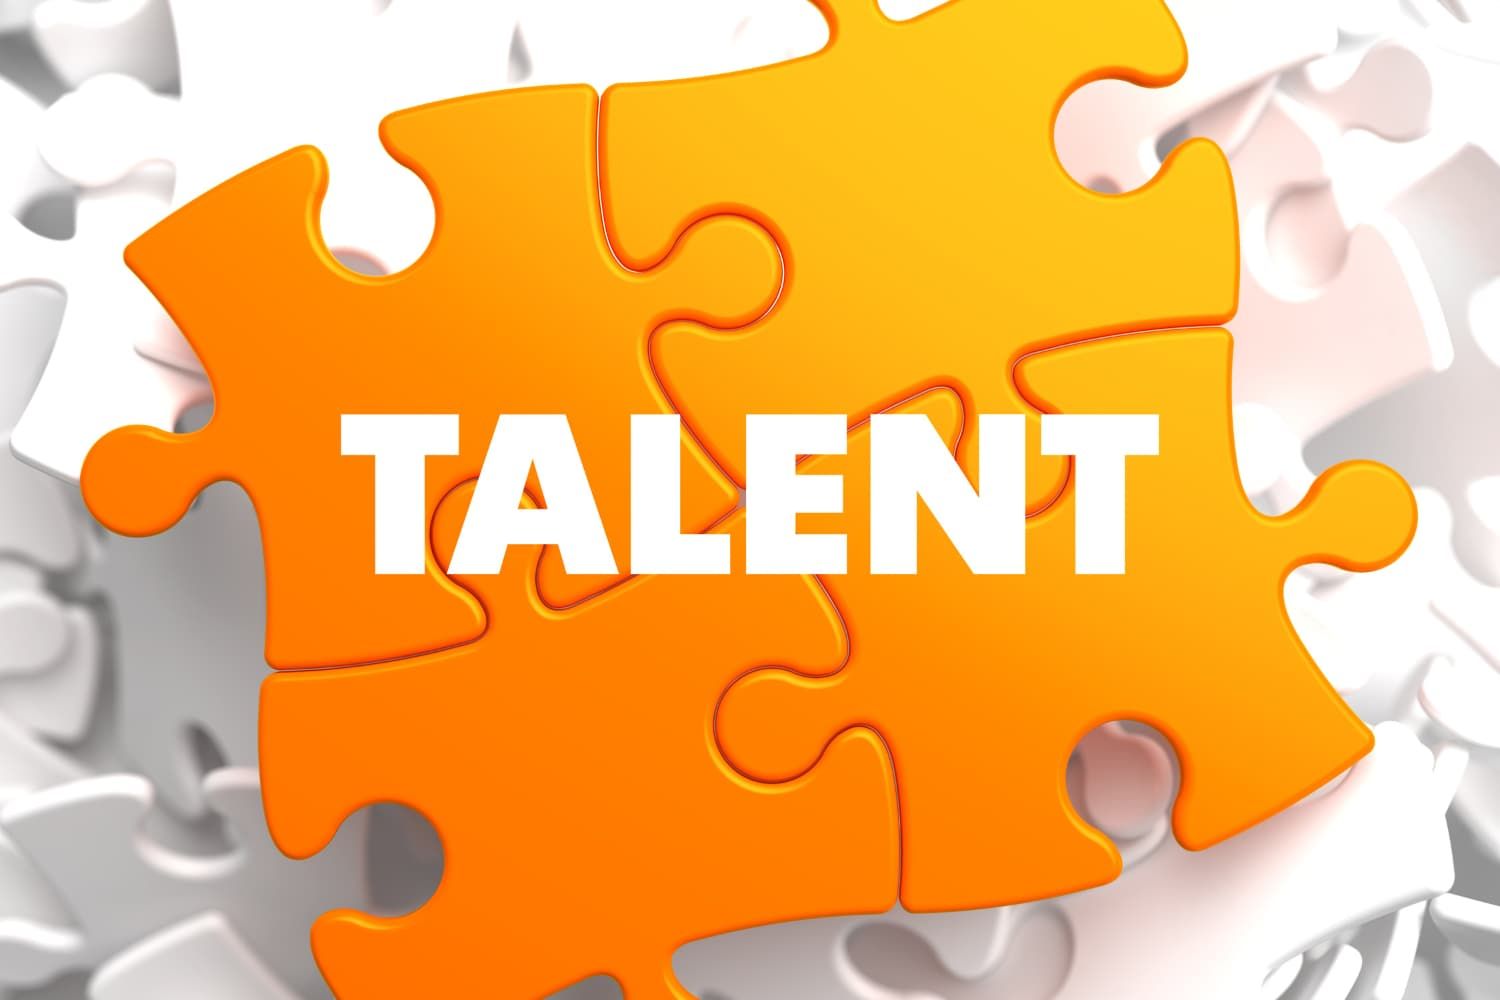 Lesson%20-%20NT%20The%20parable%20of%20the%20talents-74d6ad36 The talents